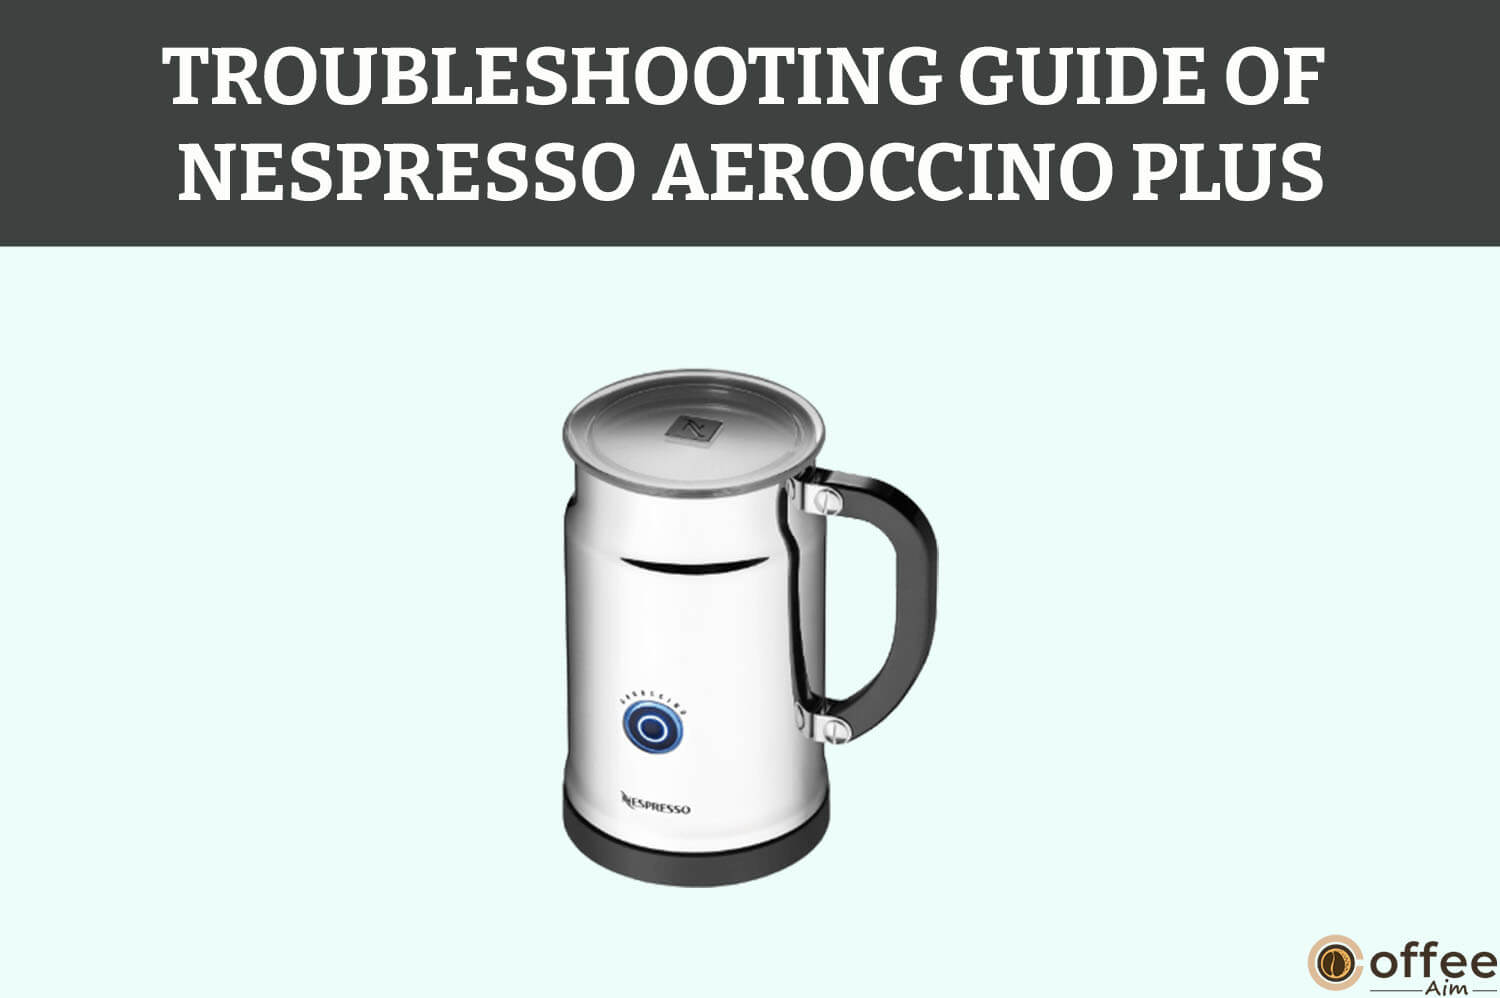 Featured image for the article "Troubleshooting guide of Nespresso Aeroccino Plus"